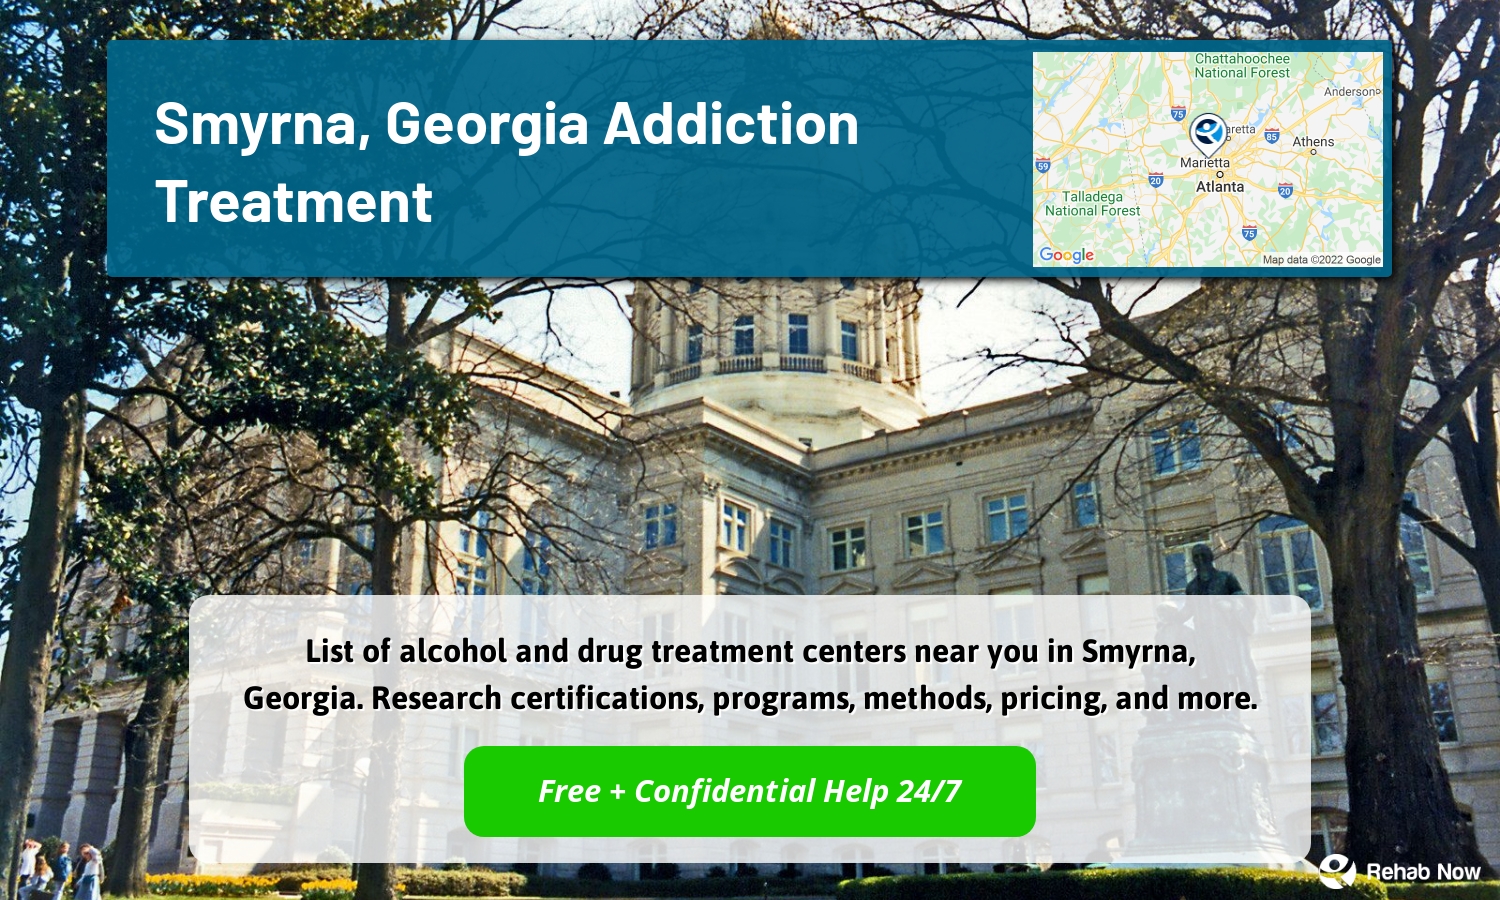 List of alcohol and drug treatment centers near you in Smyrna, Georgia. Research certifications, programs, methods, pricing, and more.